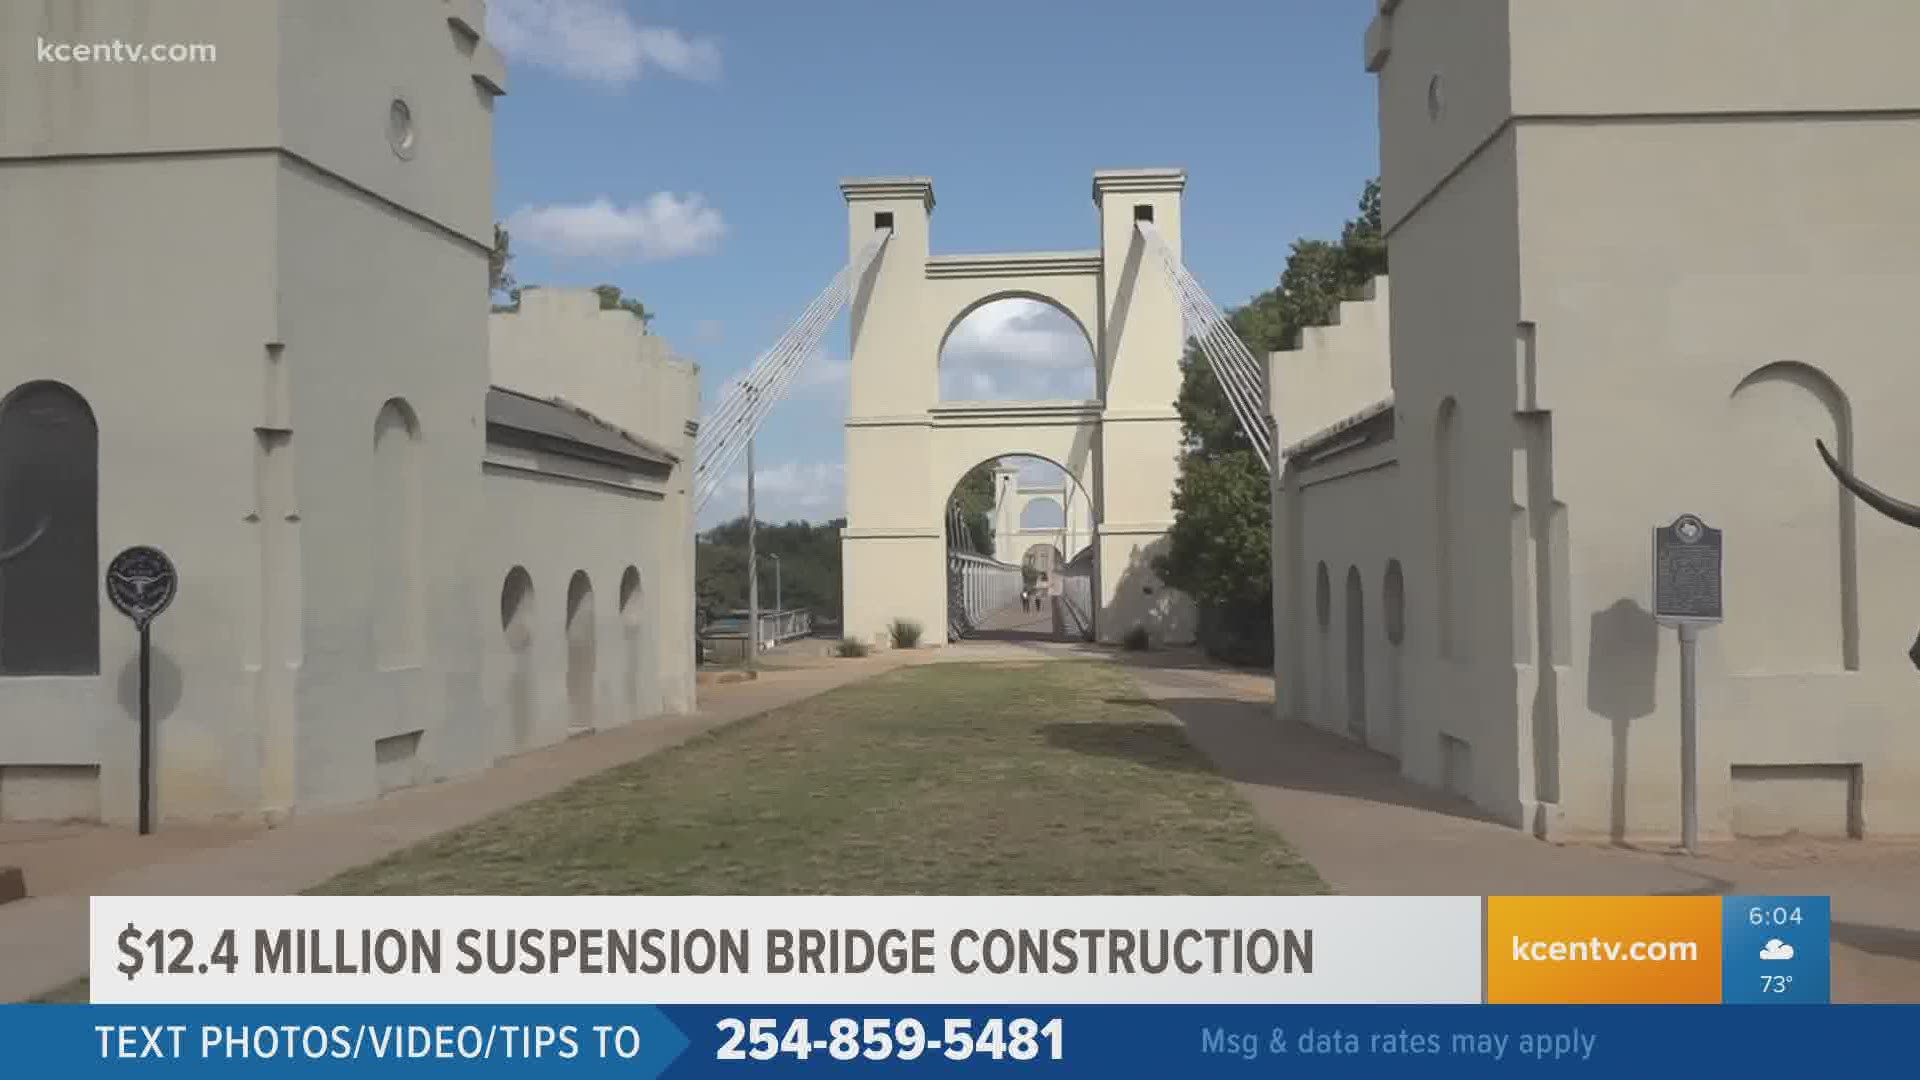 Construction starts today on the Waco Suspension Bridge renovation project. The $12.4 million project could take up to two years to finish.